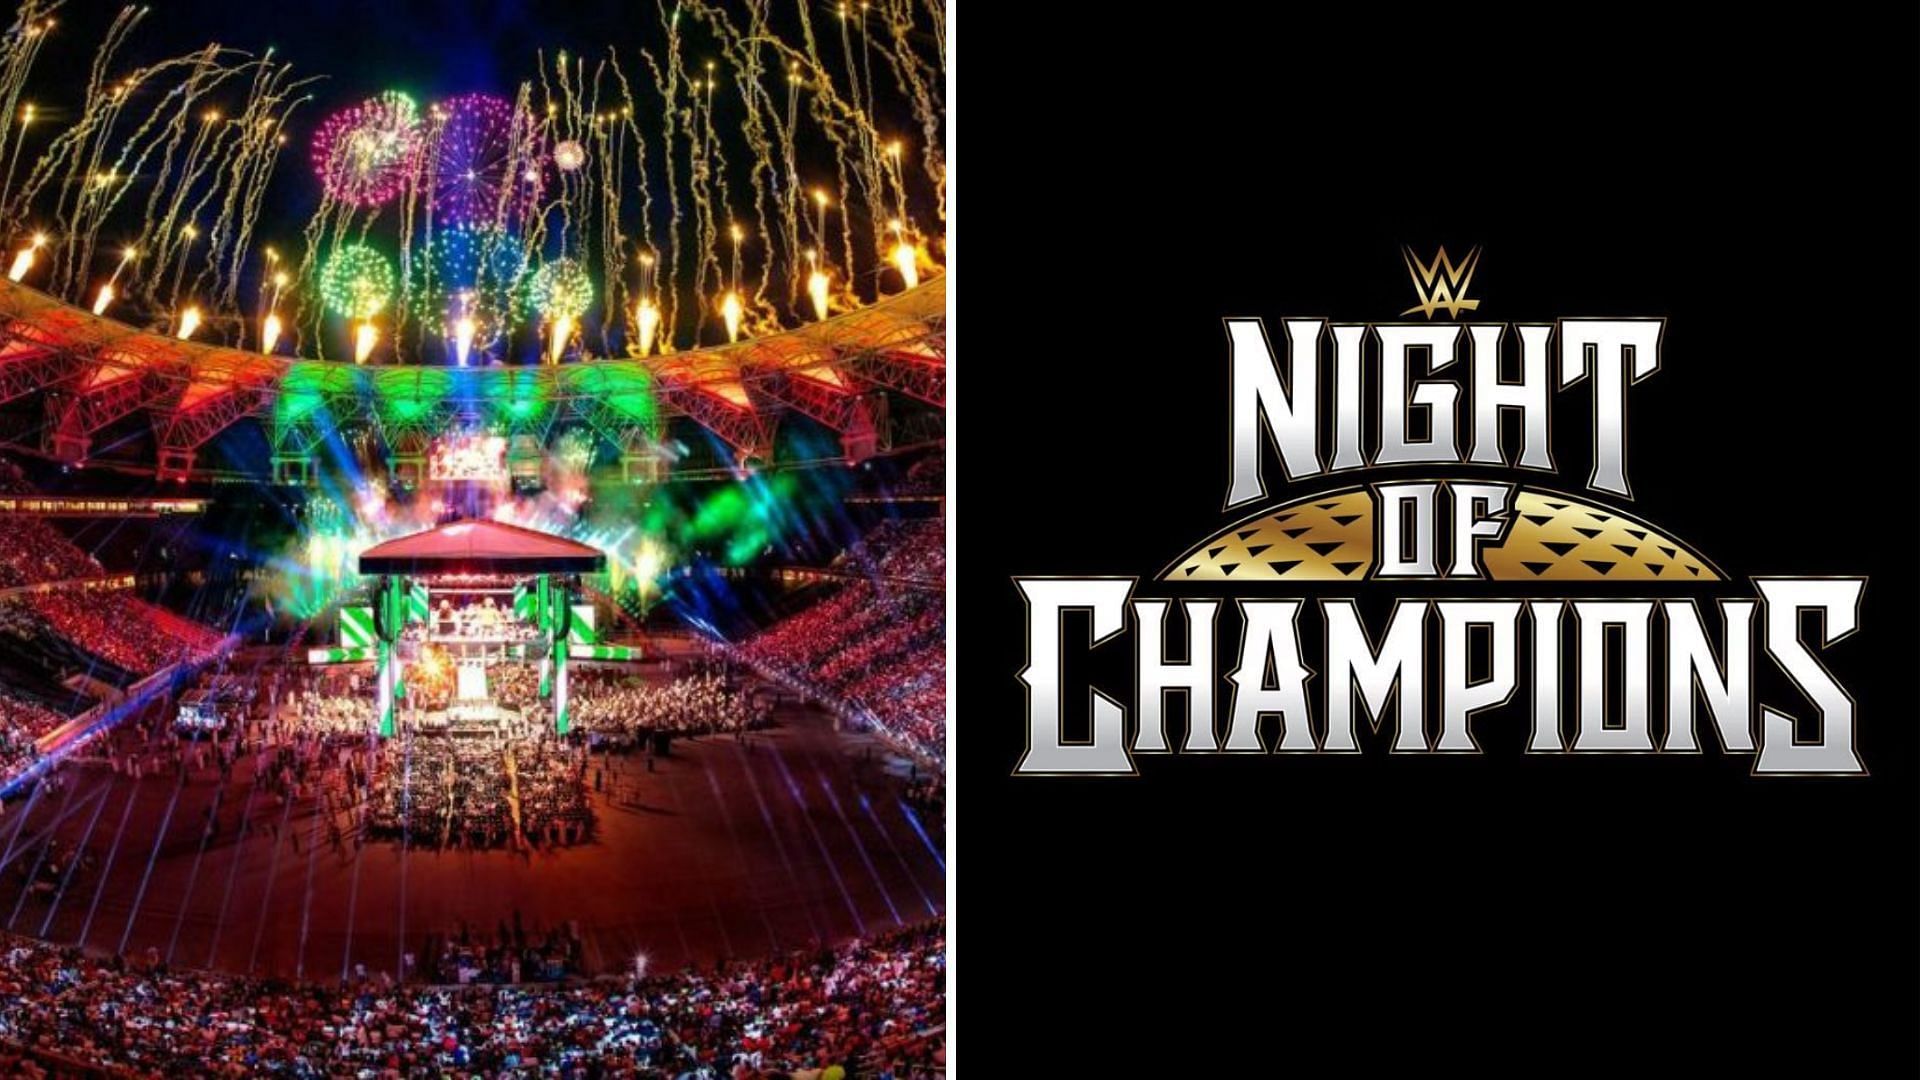 WWE Night of Champions aired yesterday in Jeddah, Saudi Arabia.